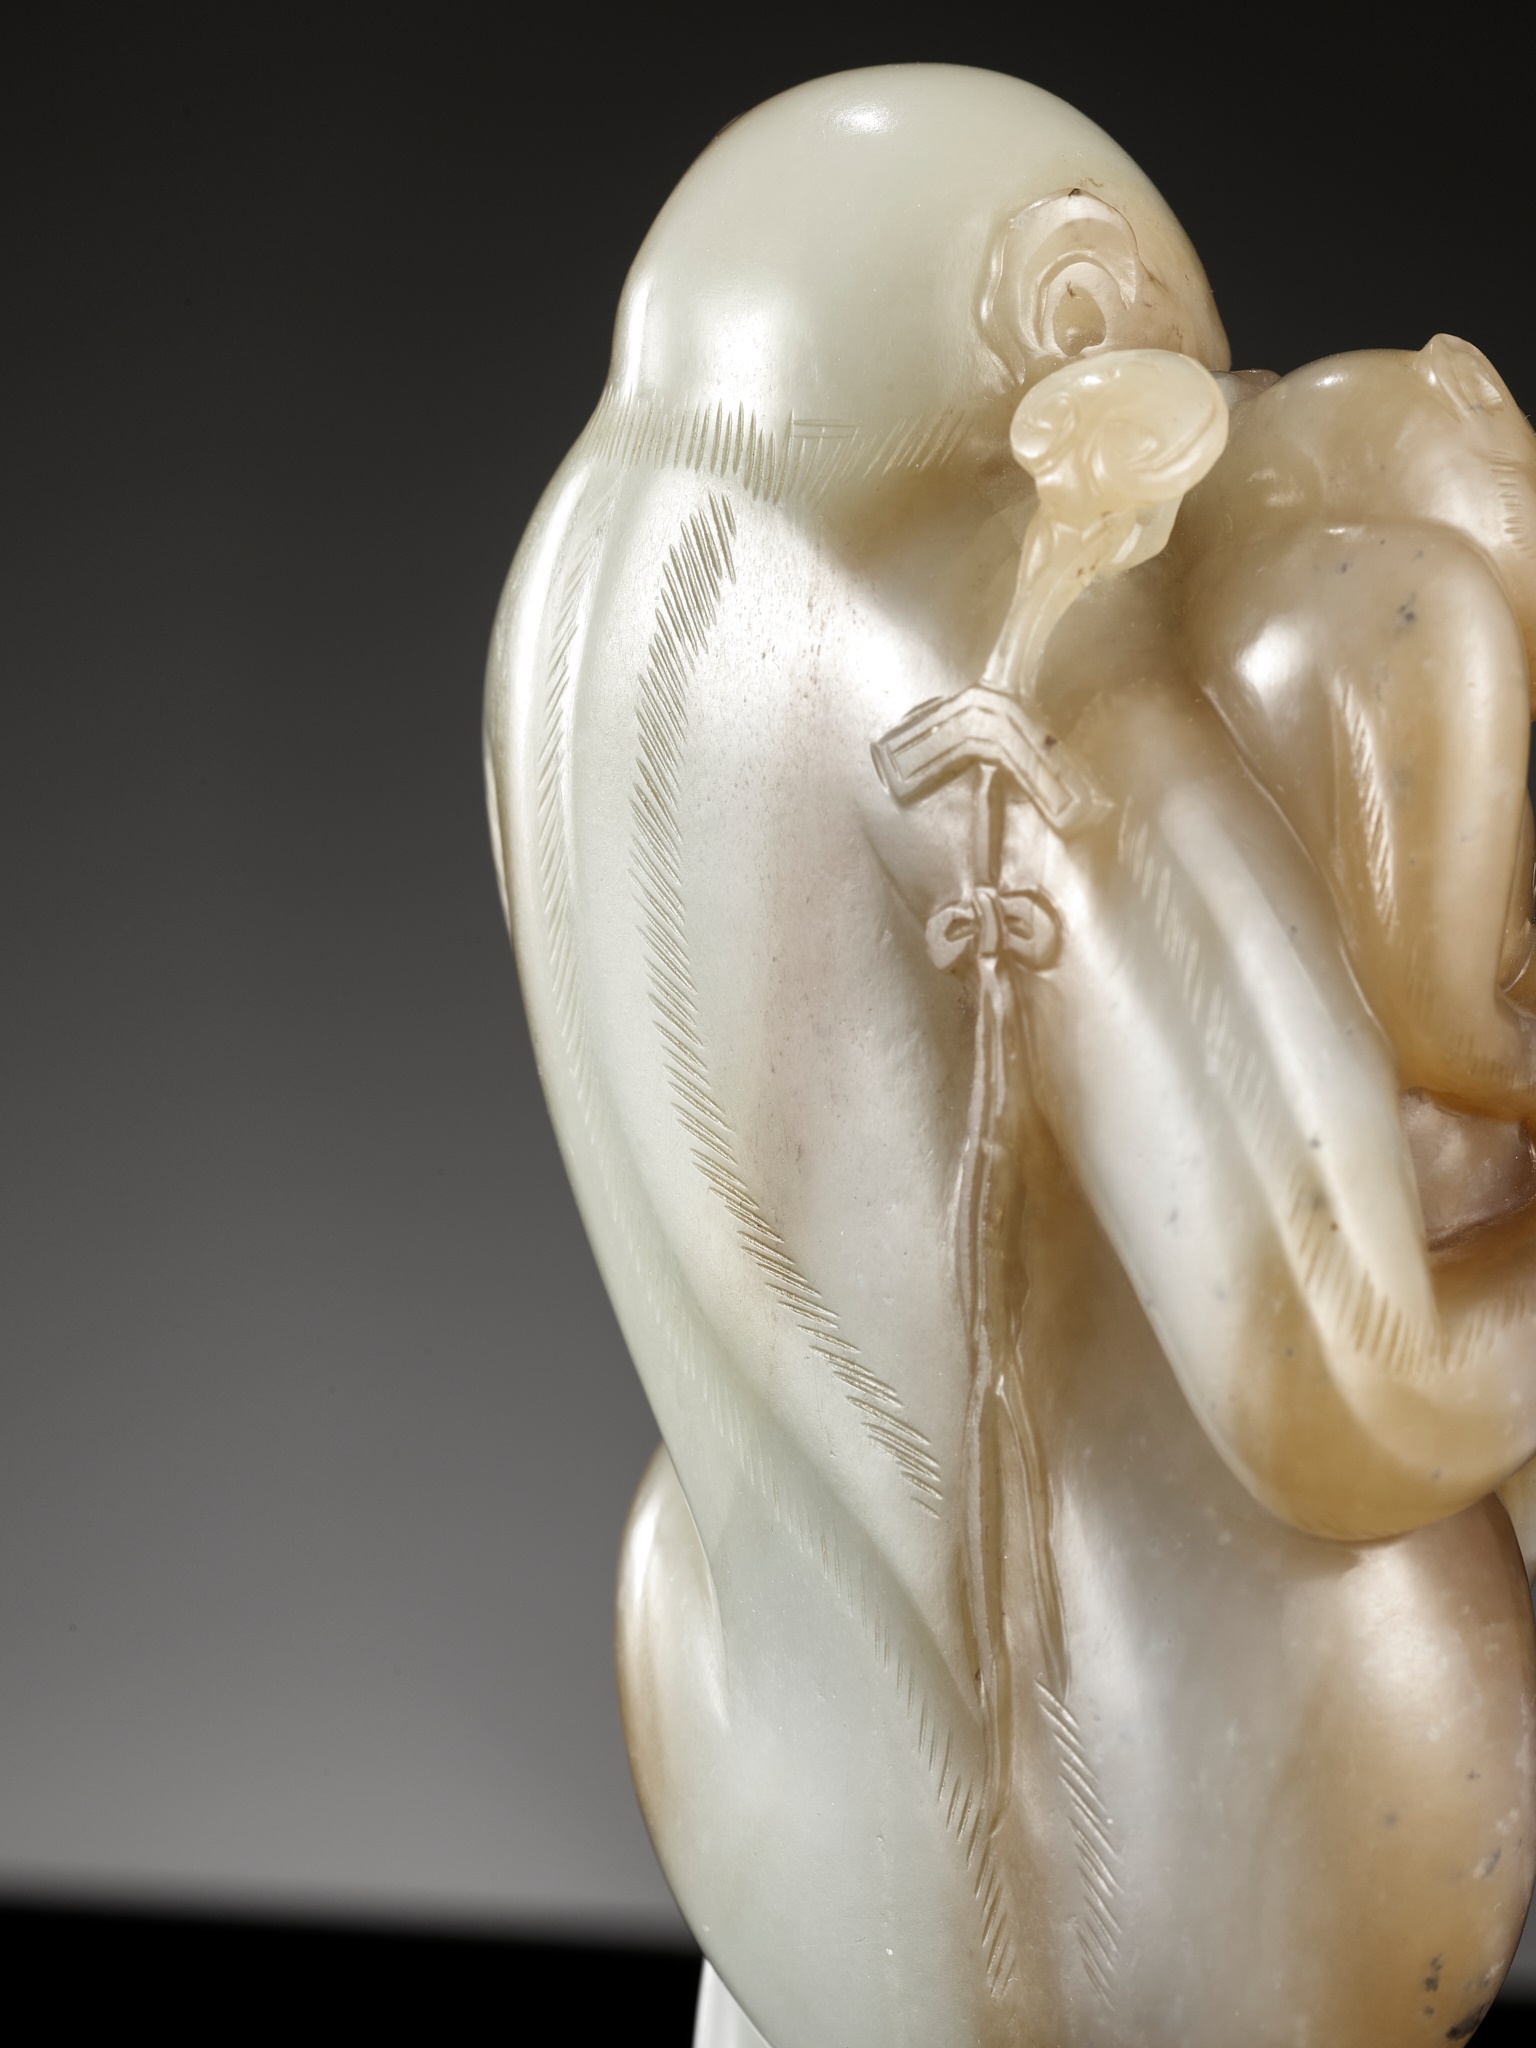 A FINE PALE CELADON AND CHESTNUT BROWN JADE 'MONKEYS AND PEACH' GROUP, 18TH CENTURY - Image 12 of 21